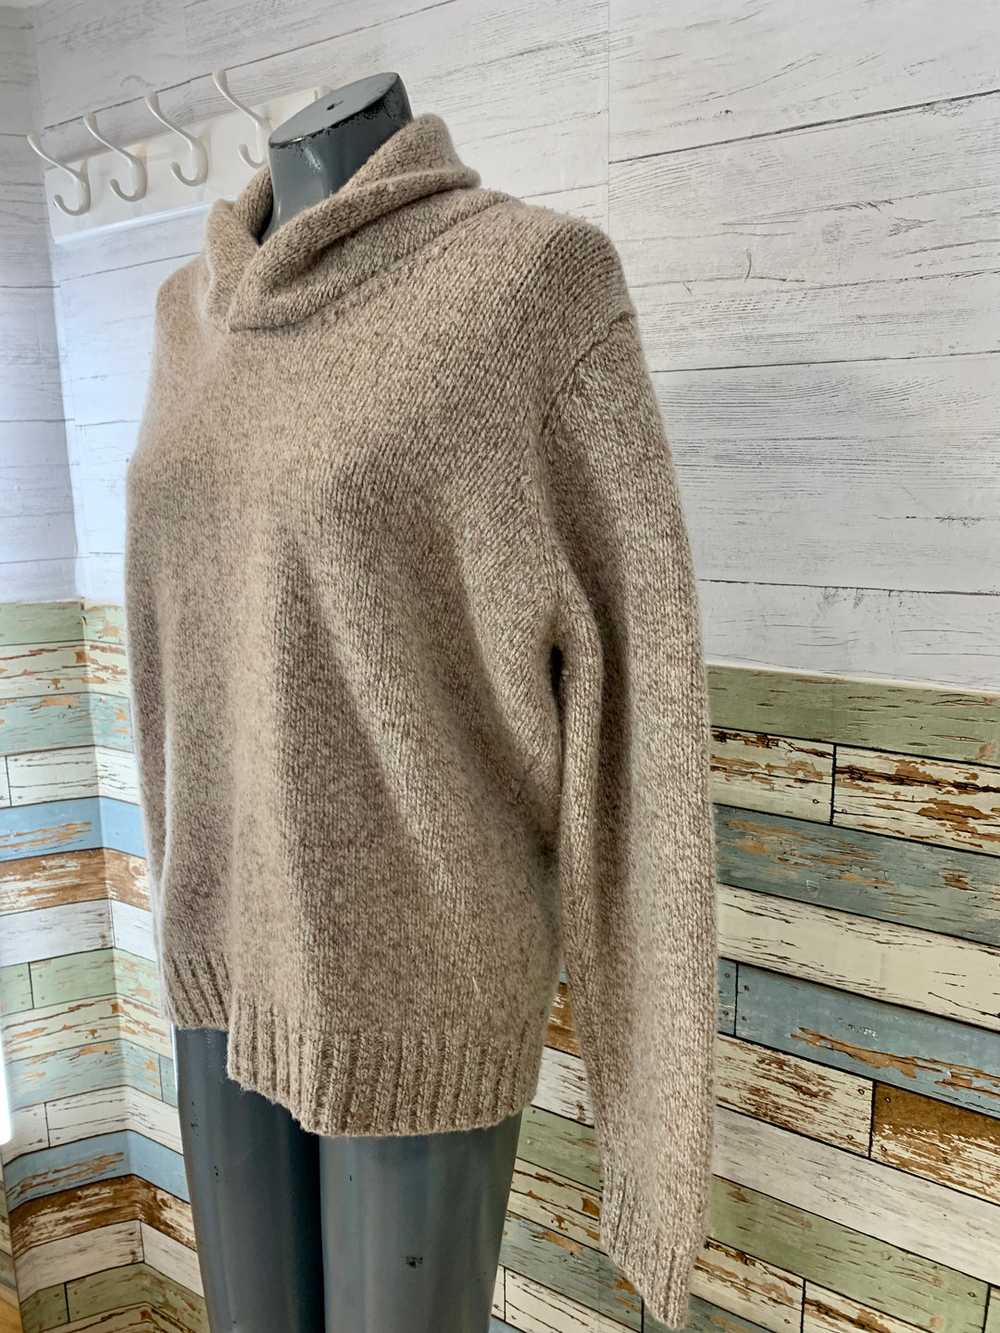 90’s Beige and Brown Knit Shawl Neck Sweater - image 2